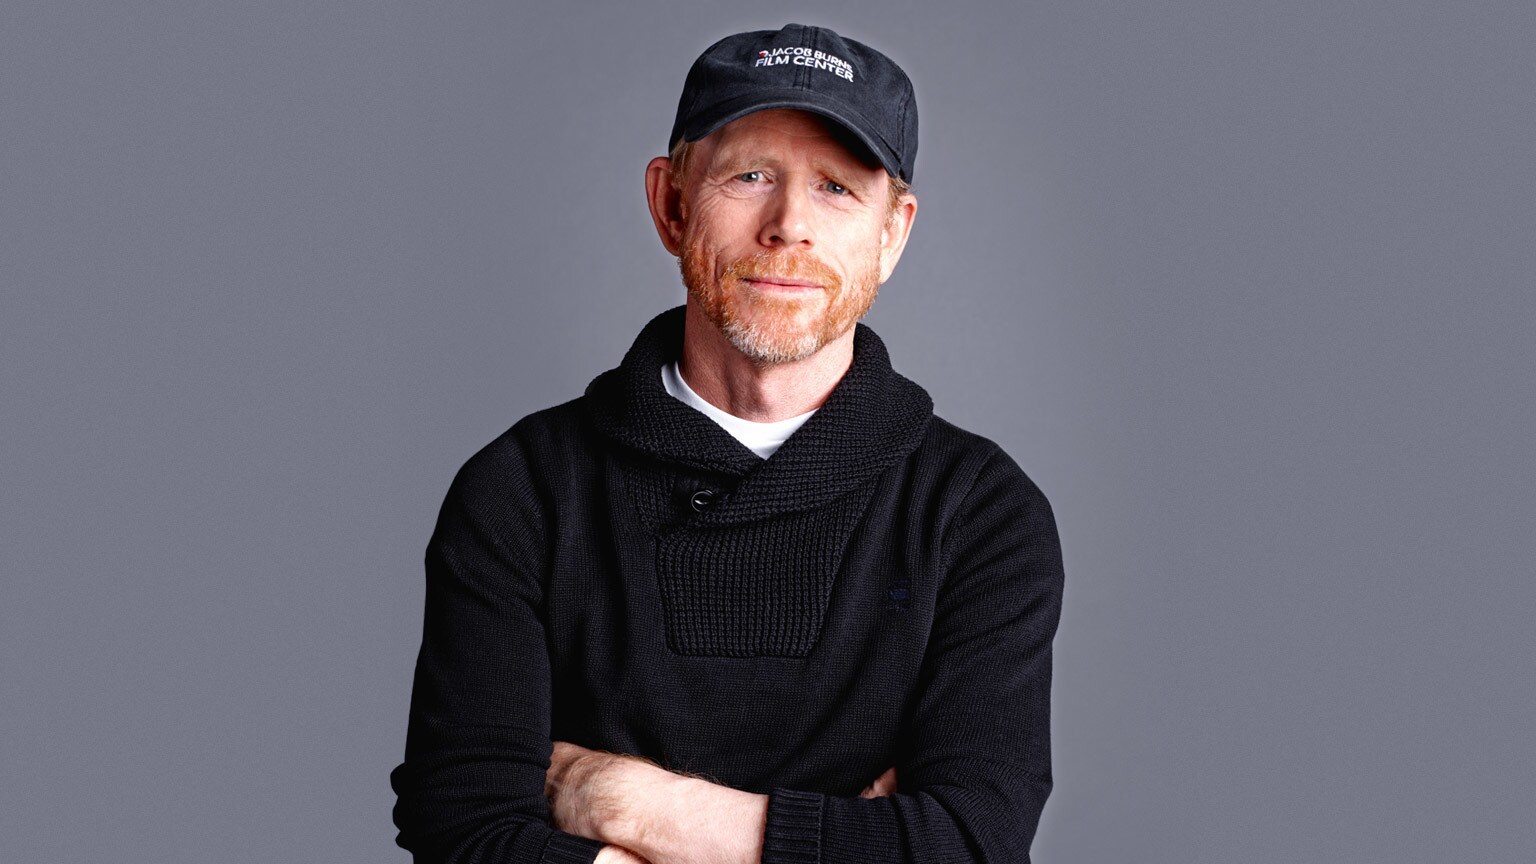 Ron Howard to Assume Directorial Duties on the Untitled Han Solo Film